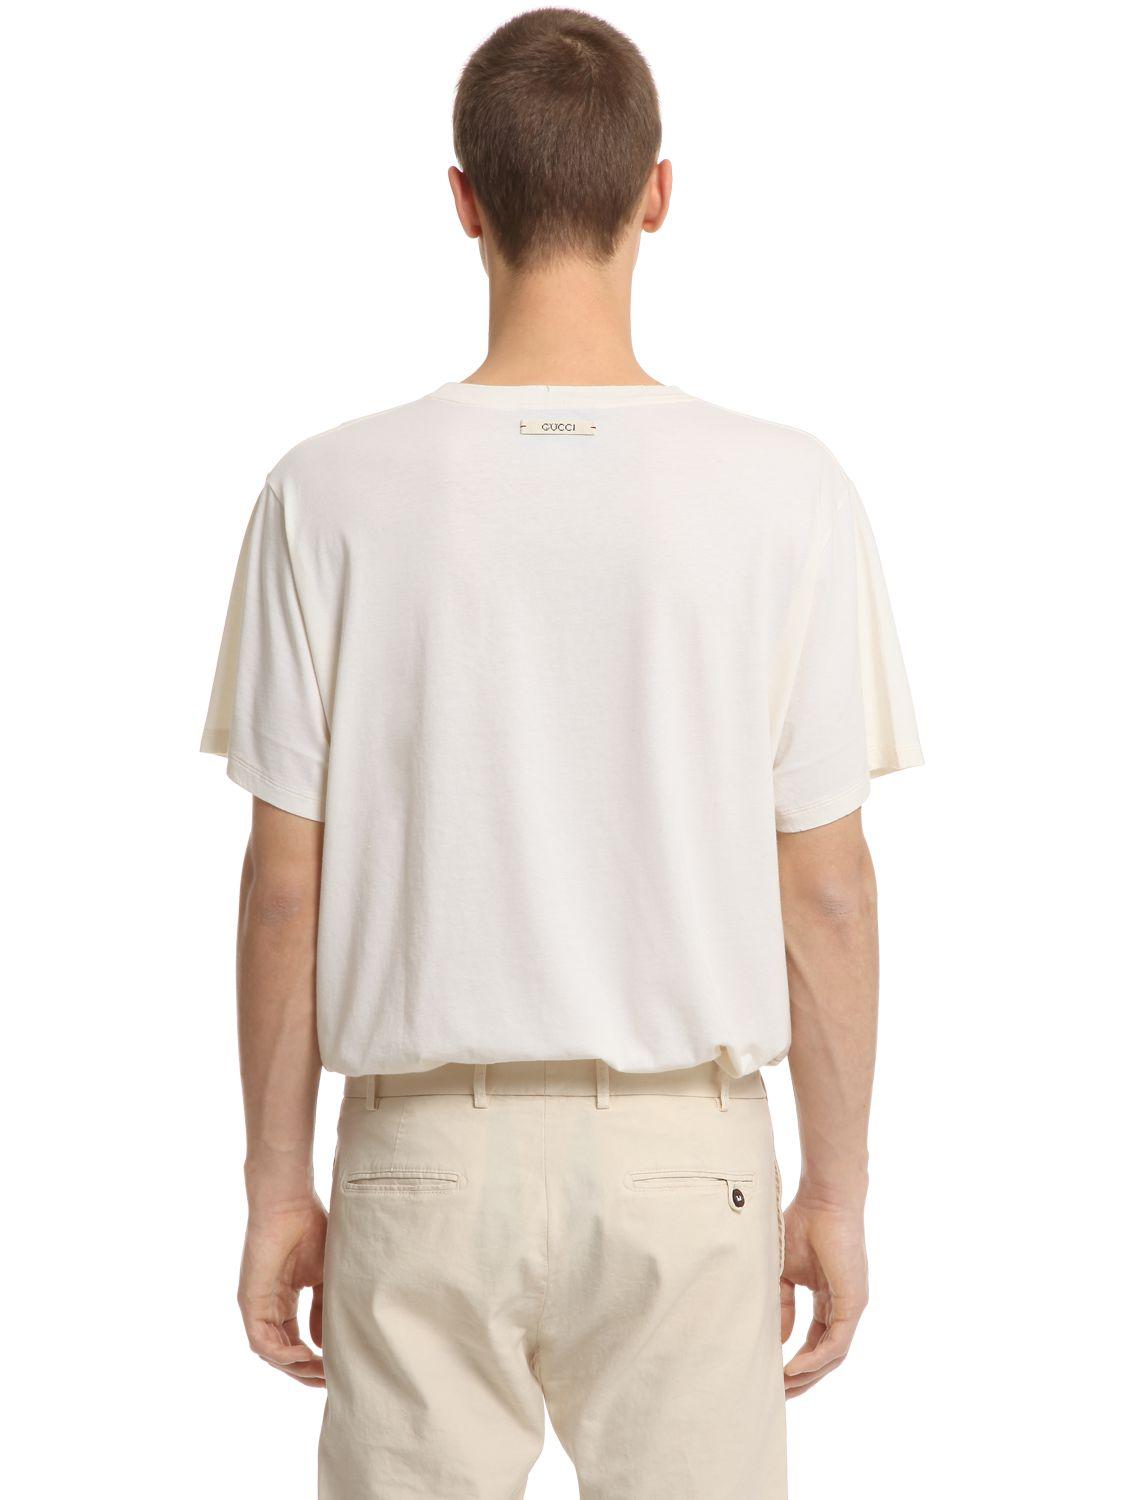 Lyst - Gucci Printed Cotton Jersey T-shirt in White for Men